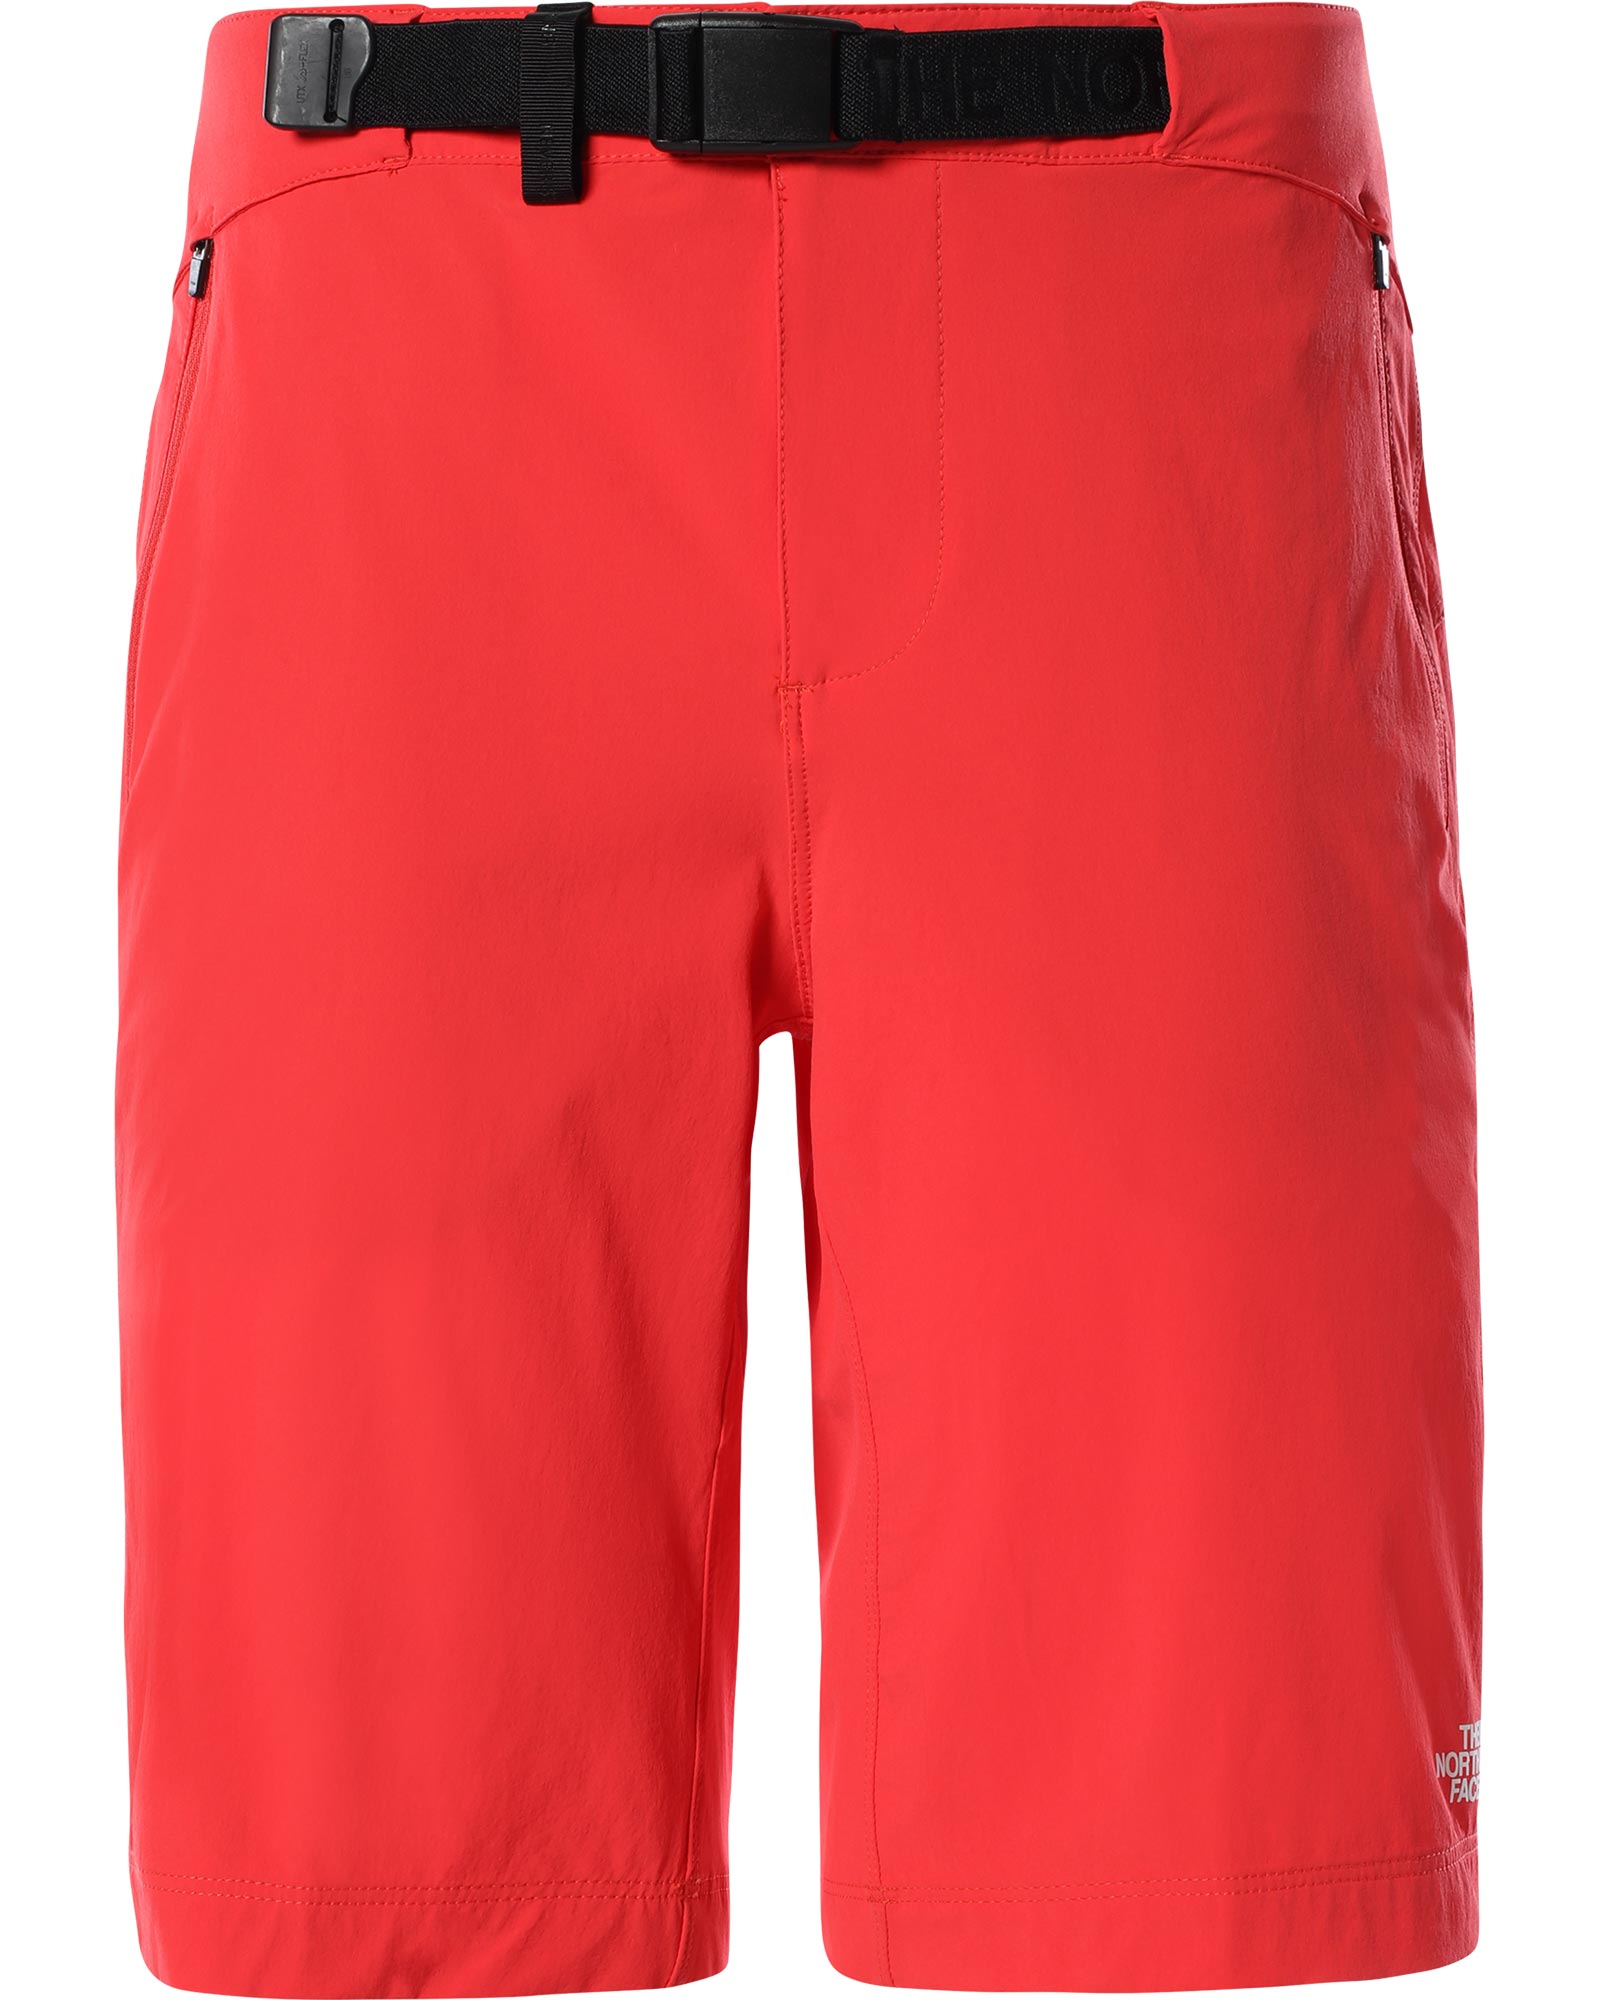 Product image of The North Face Speedlight Women's Shorts